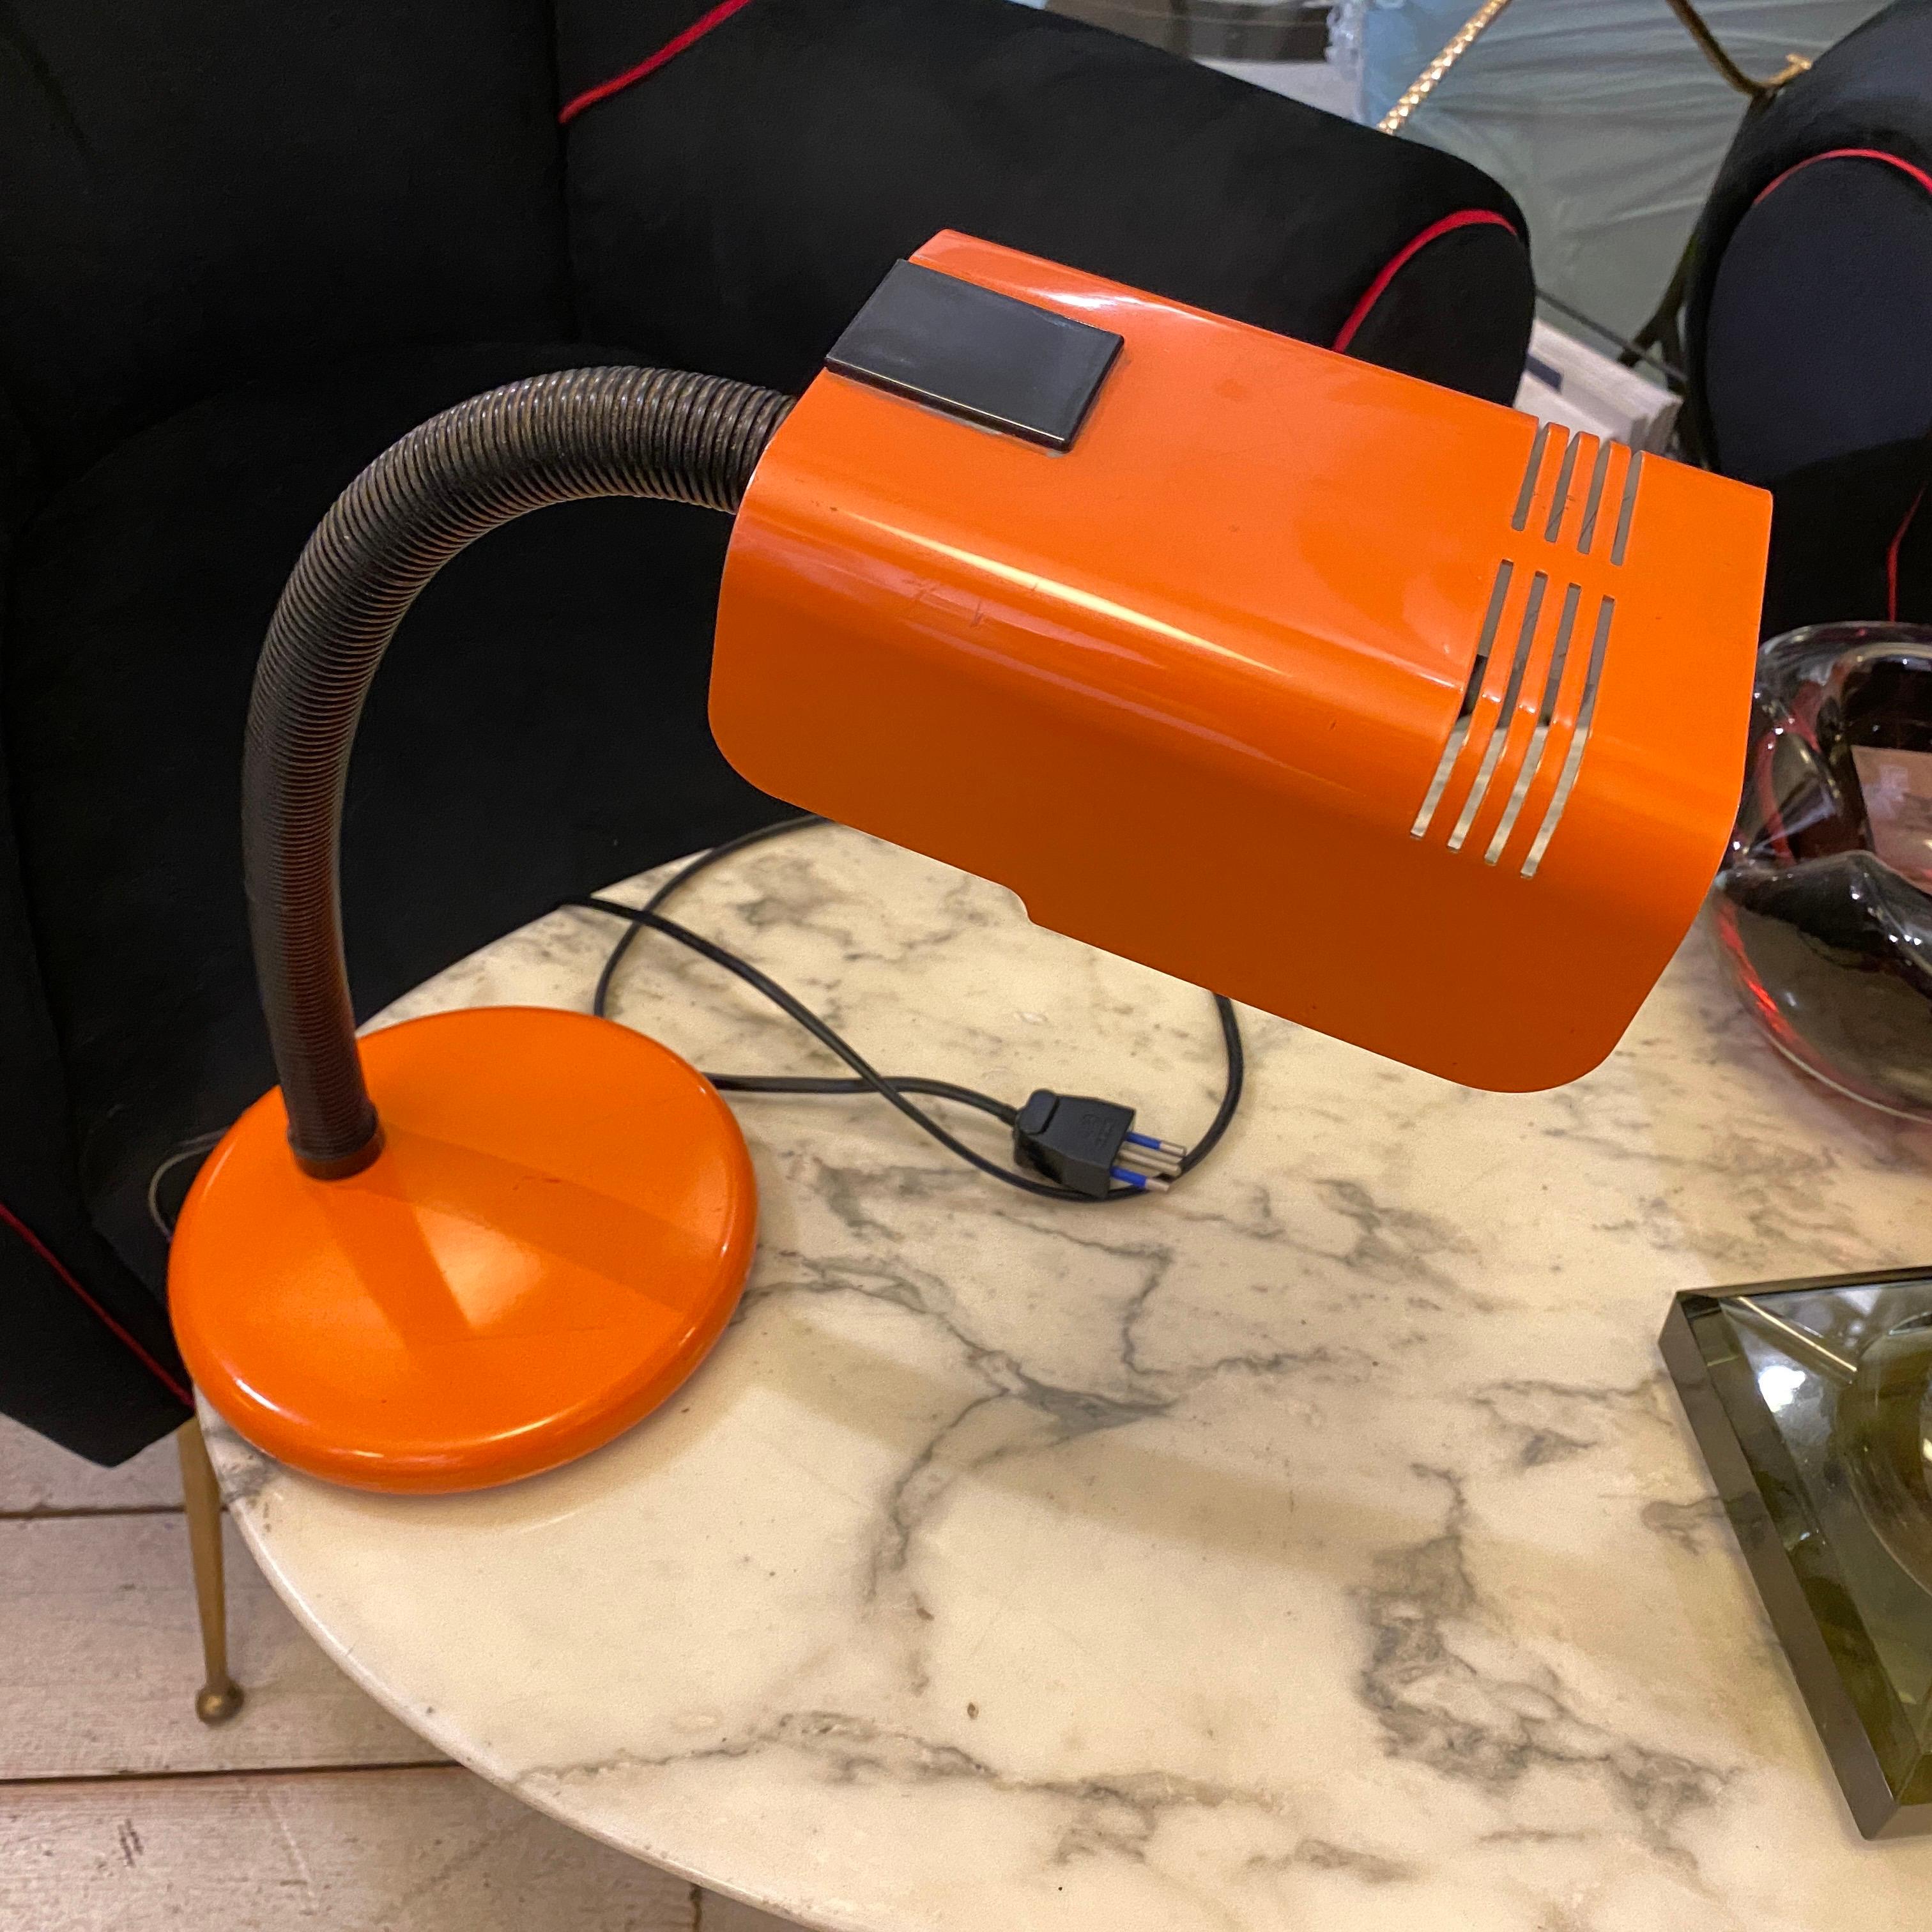 A Mid-Century Modern orange and black table lamp by Targetti. It works 110-240 volts and needs a regular e27 bulb. Lamp is marked on the bottom.